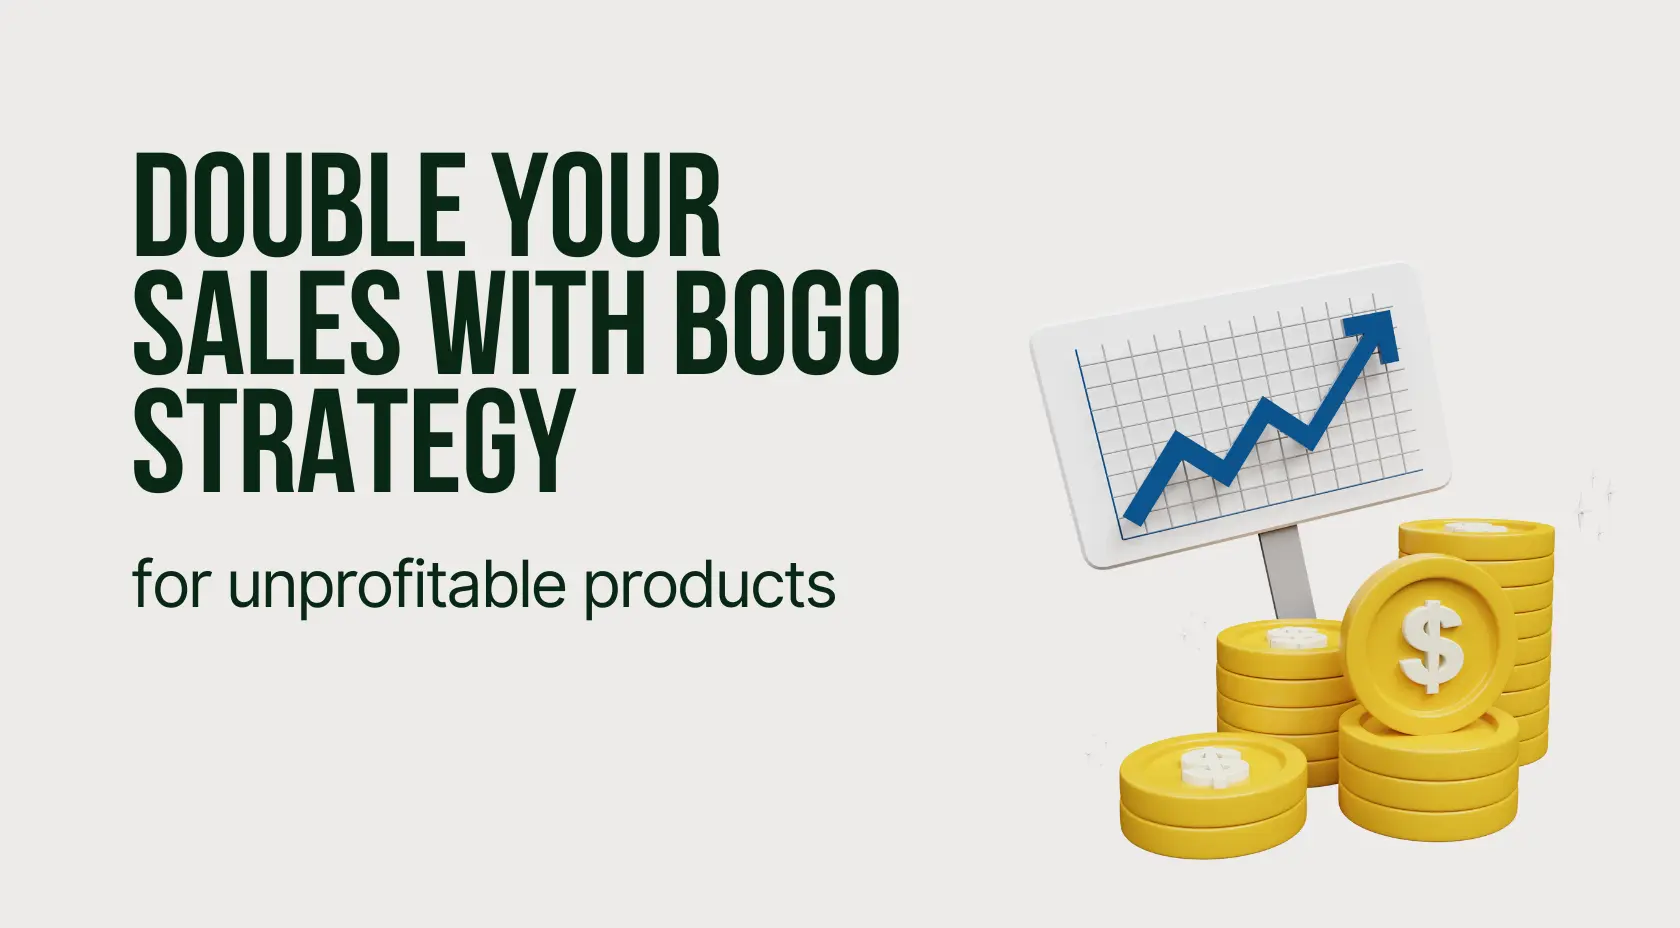 Double Your Sales with BOGO Strategy on a Popup for Unprofitable Products